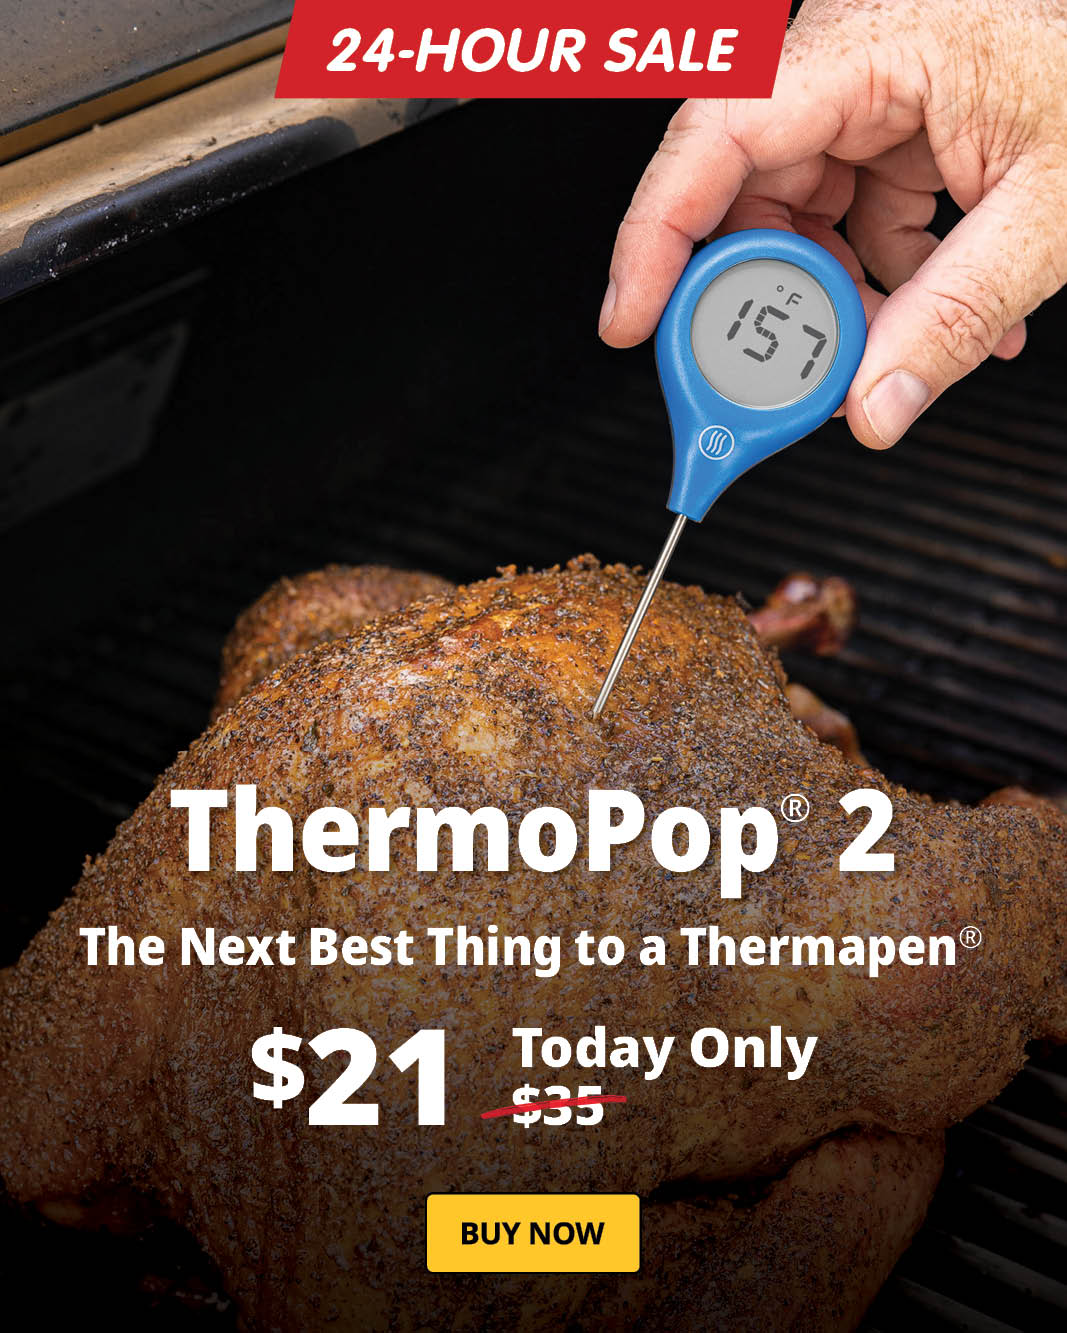 ThermoPop® 2: Innovation, Easy on the Budget